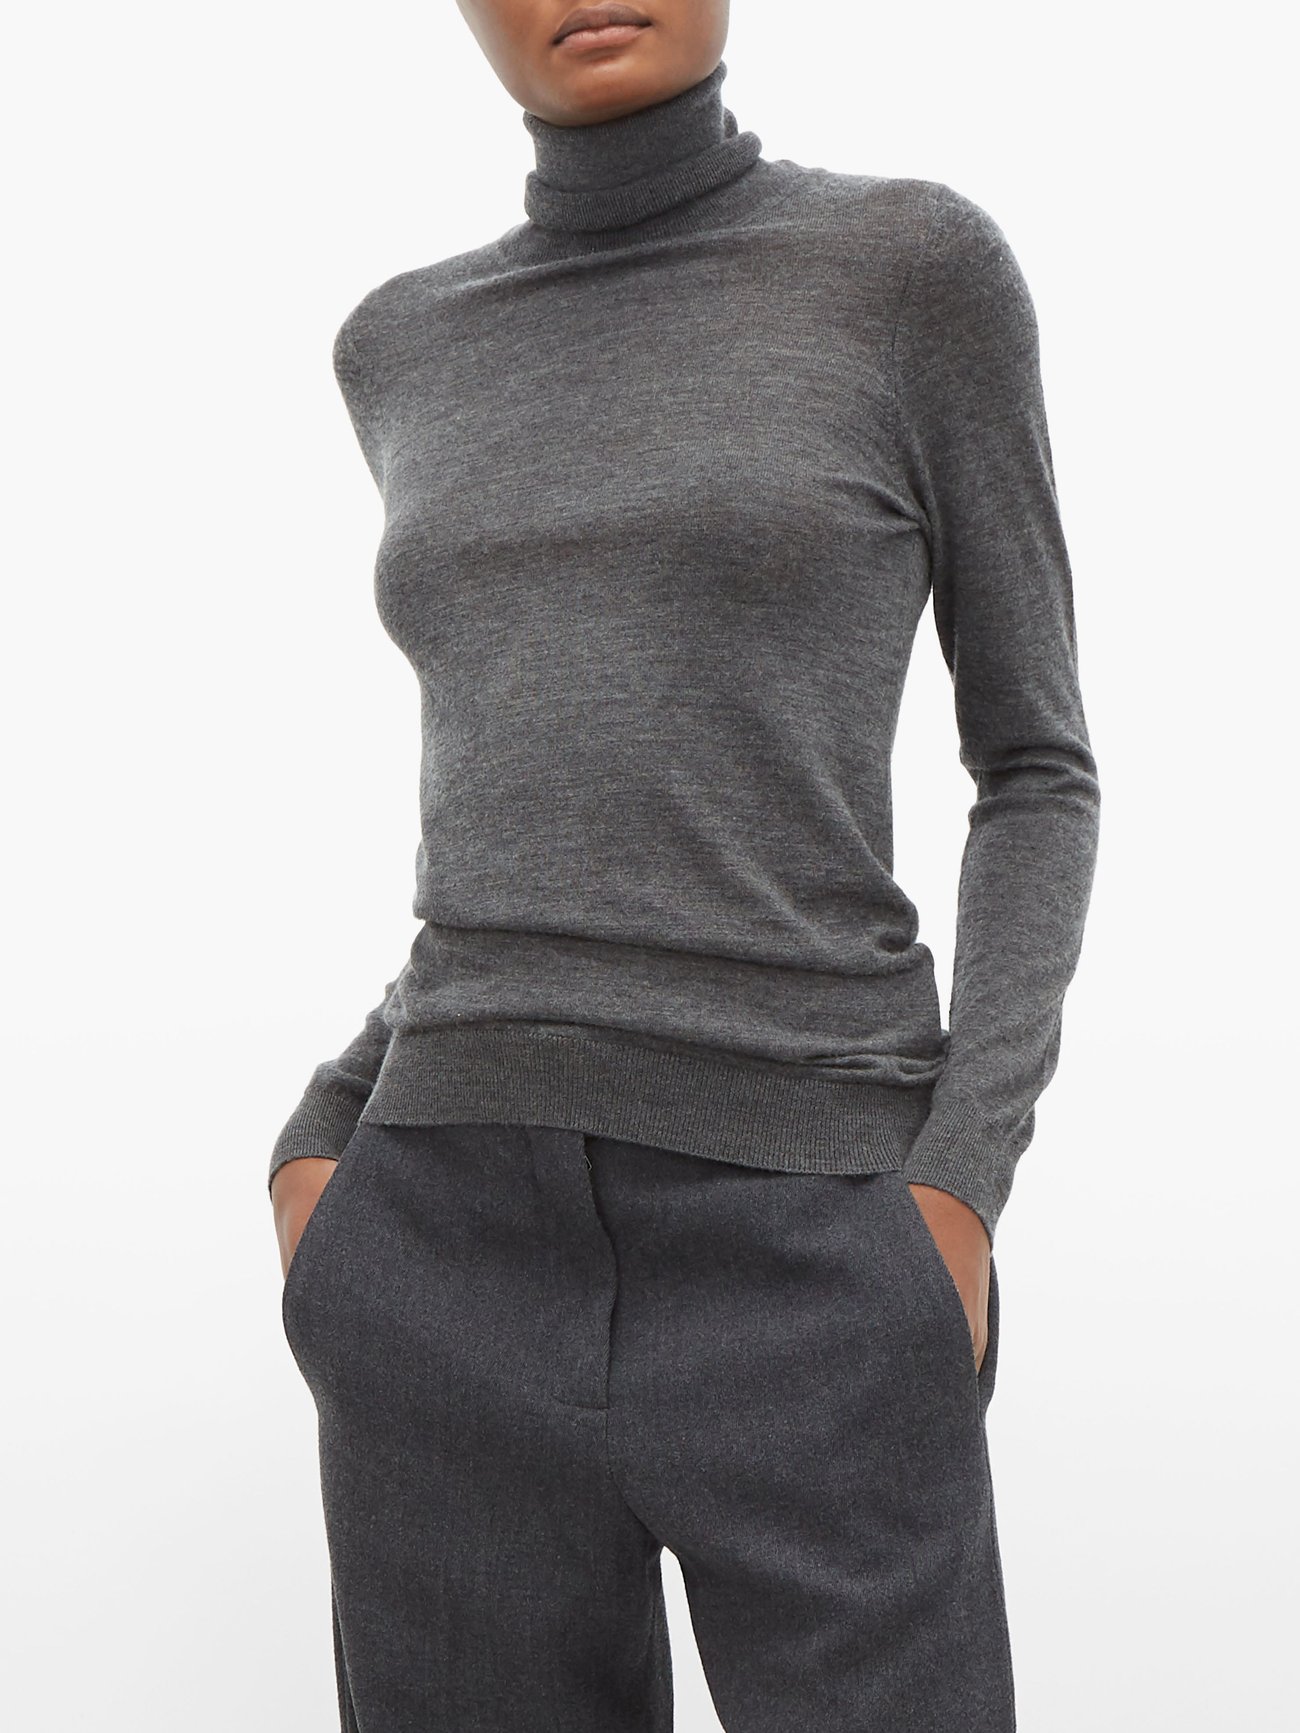 Grey Roll-neck sweater US | fine-knit MATCHES Raey cashmere 